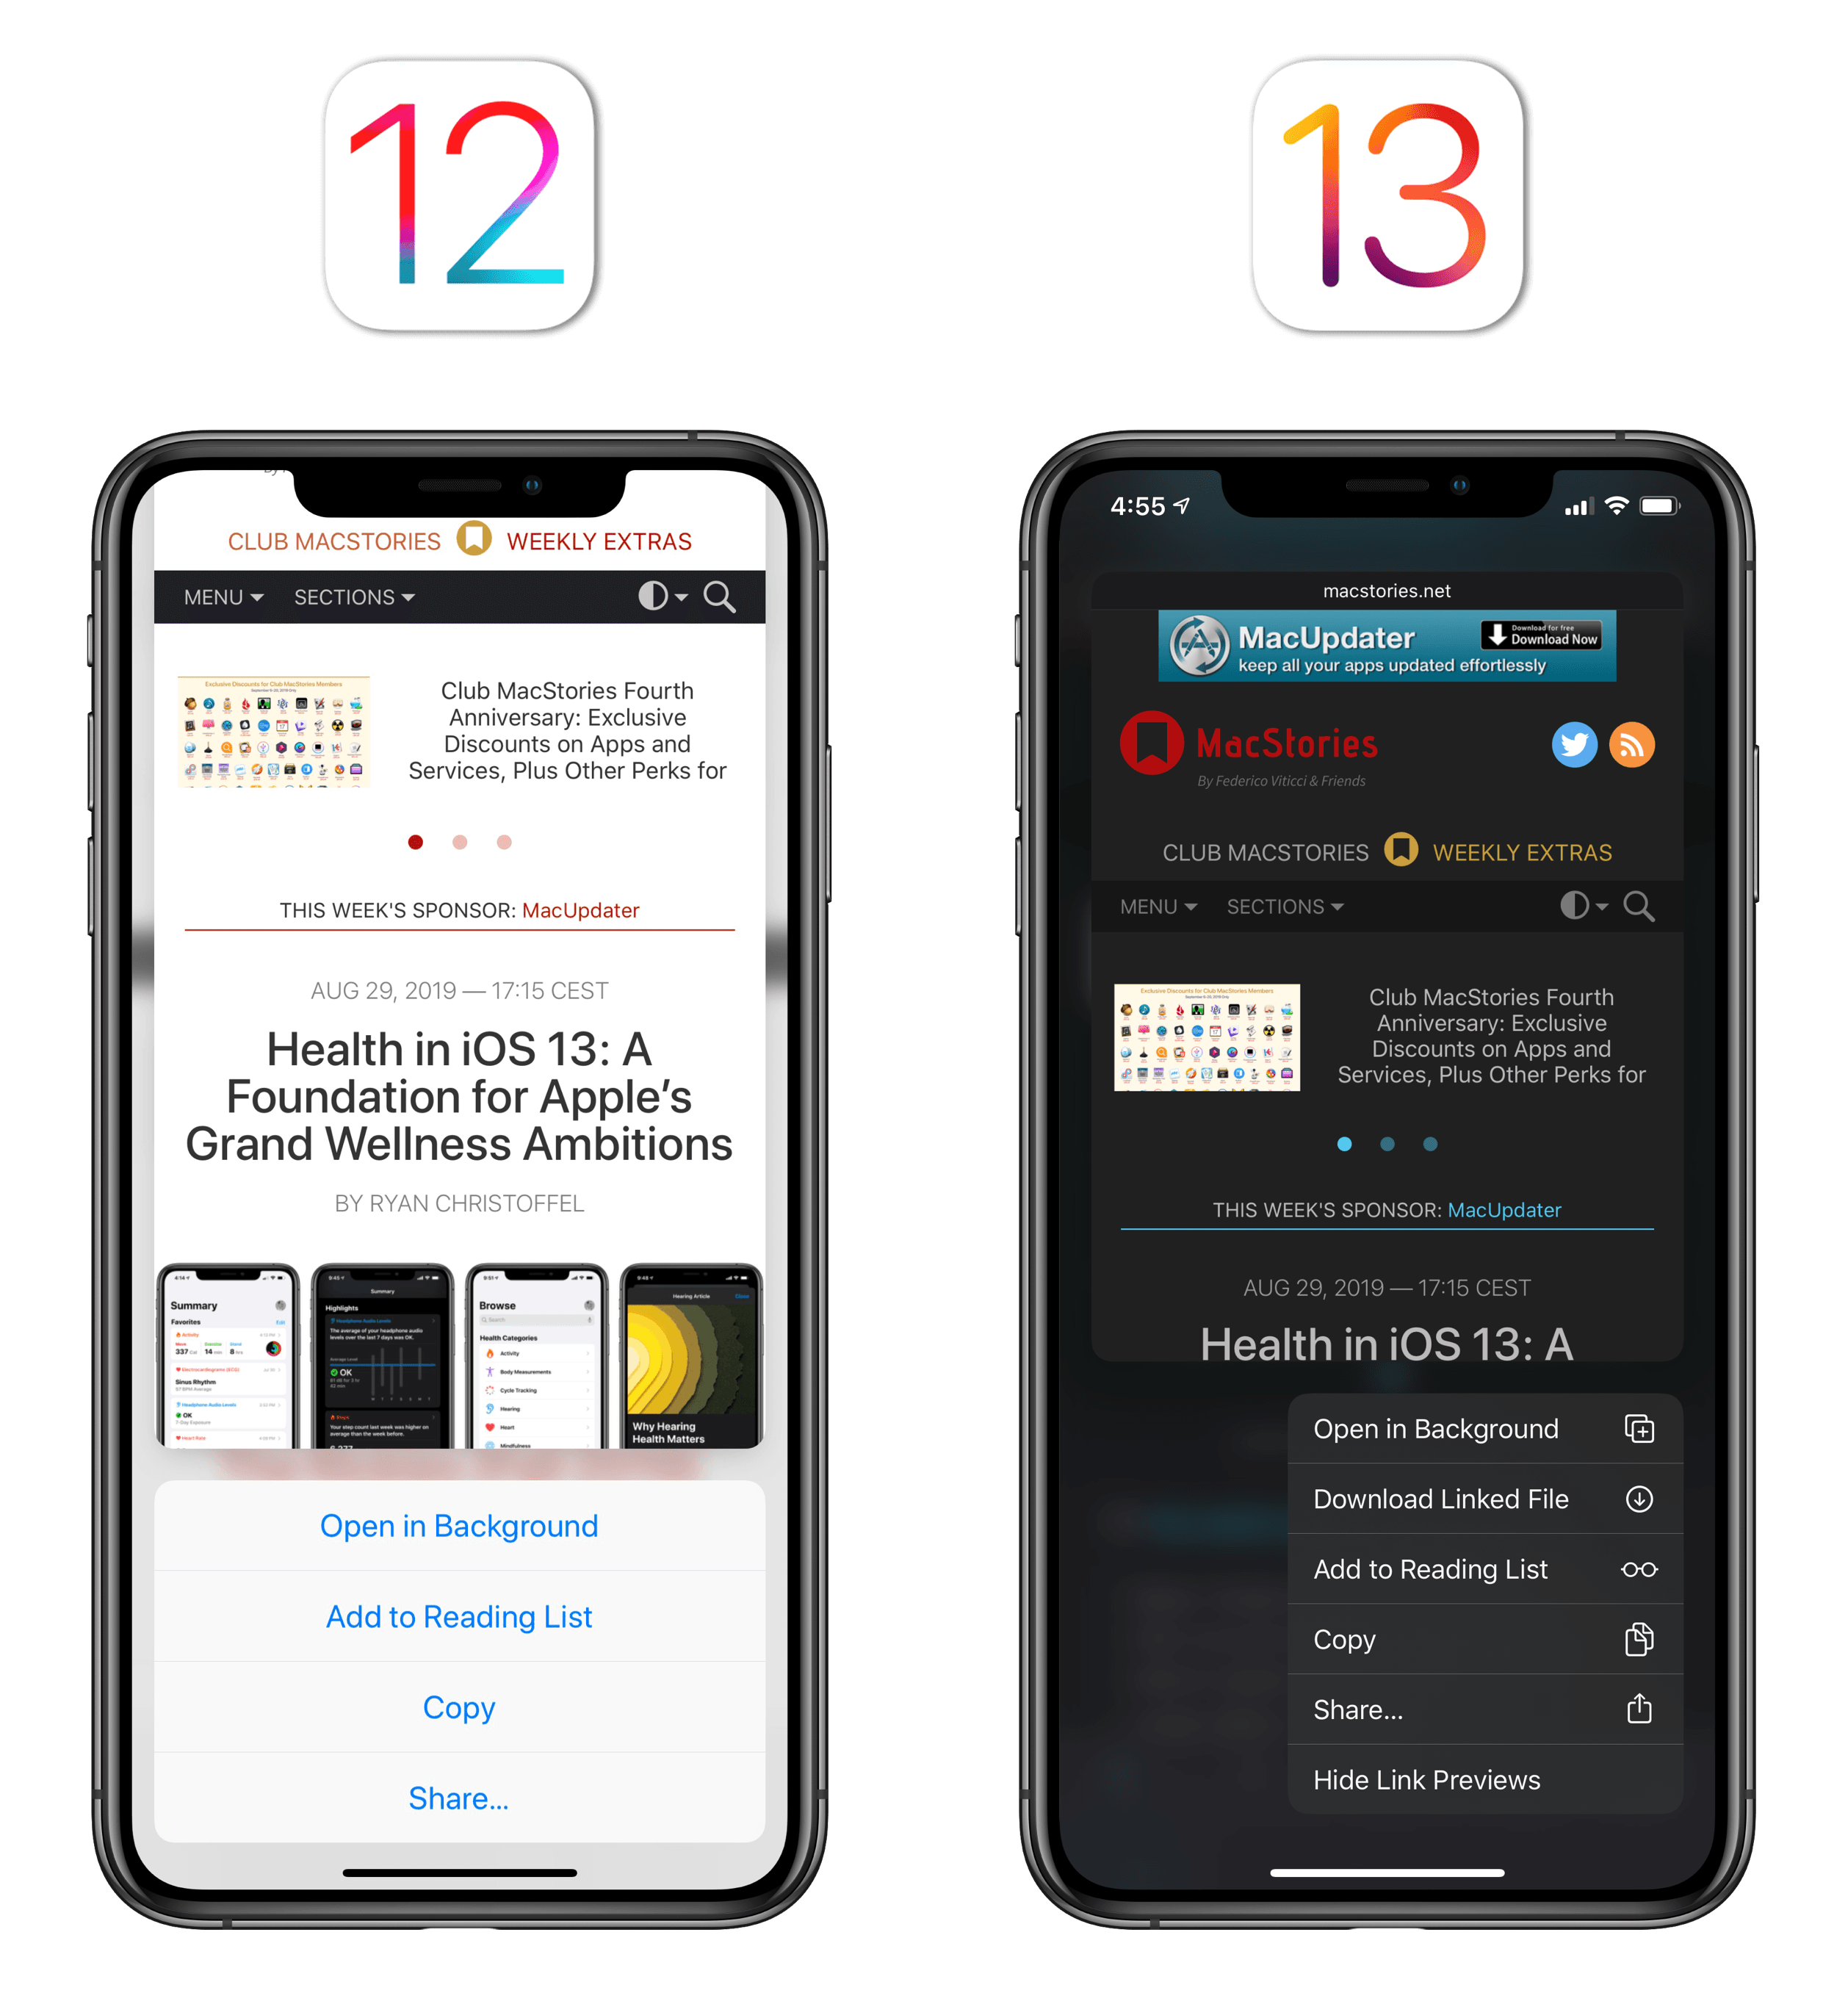 You needed to swipe up to see actions available for peek and pop in iOS 12.